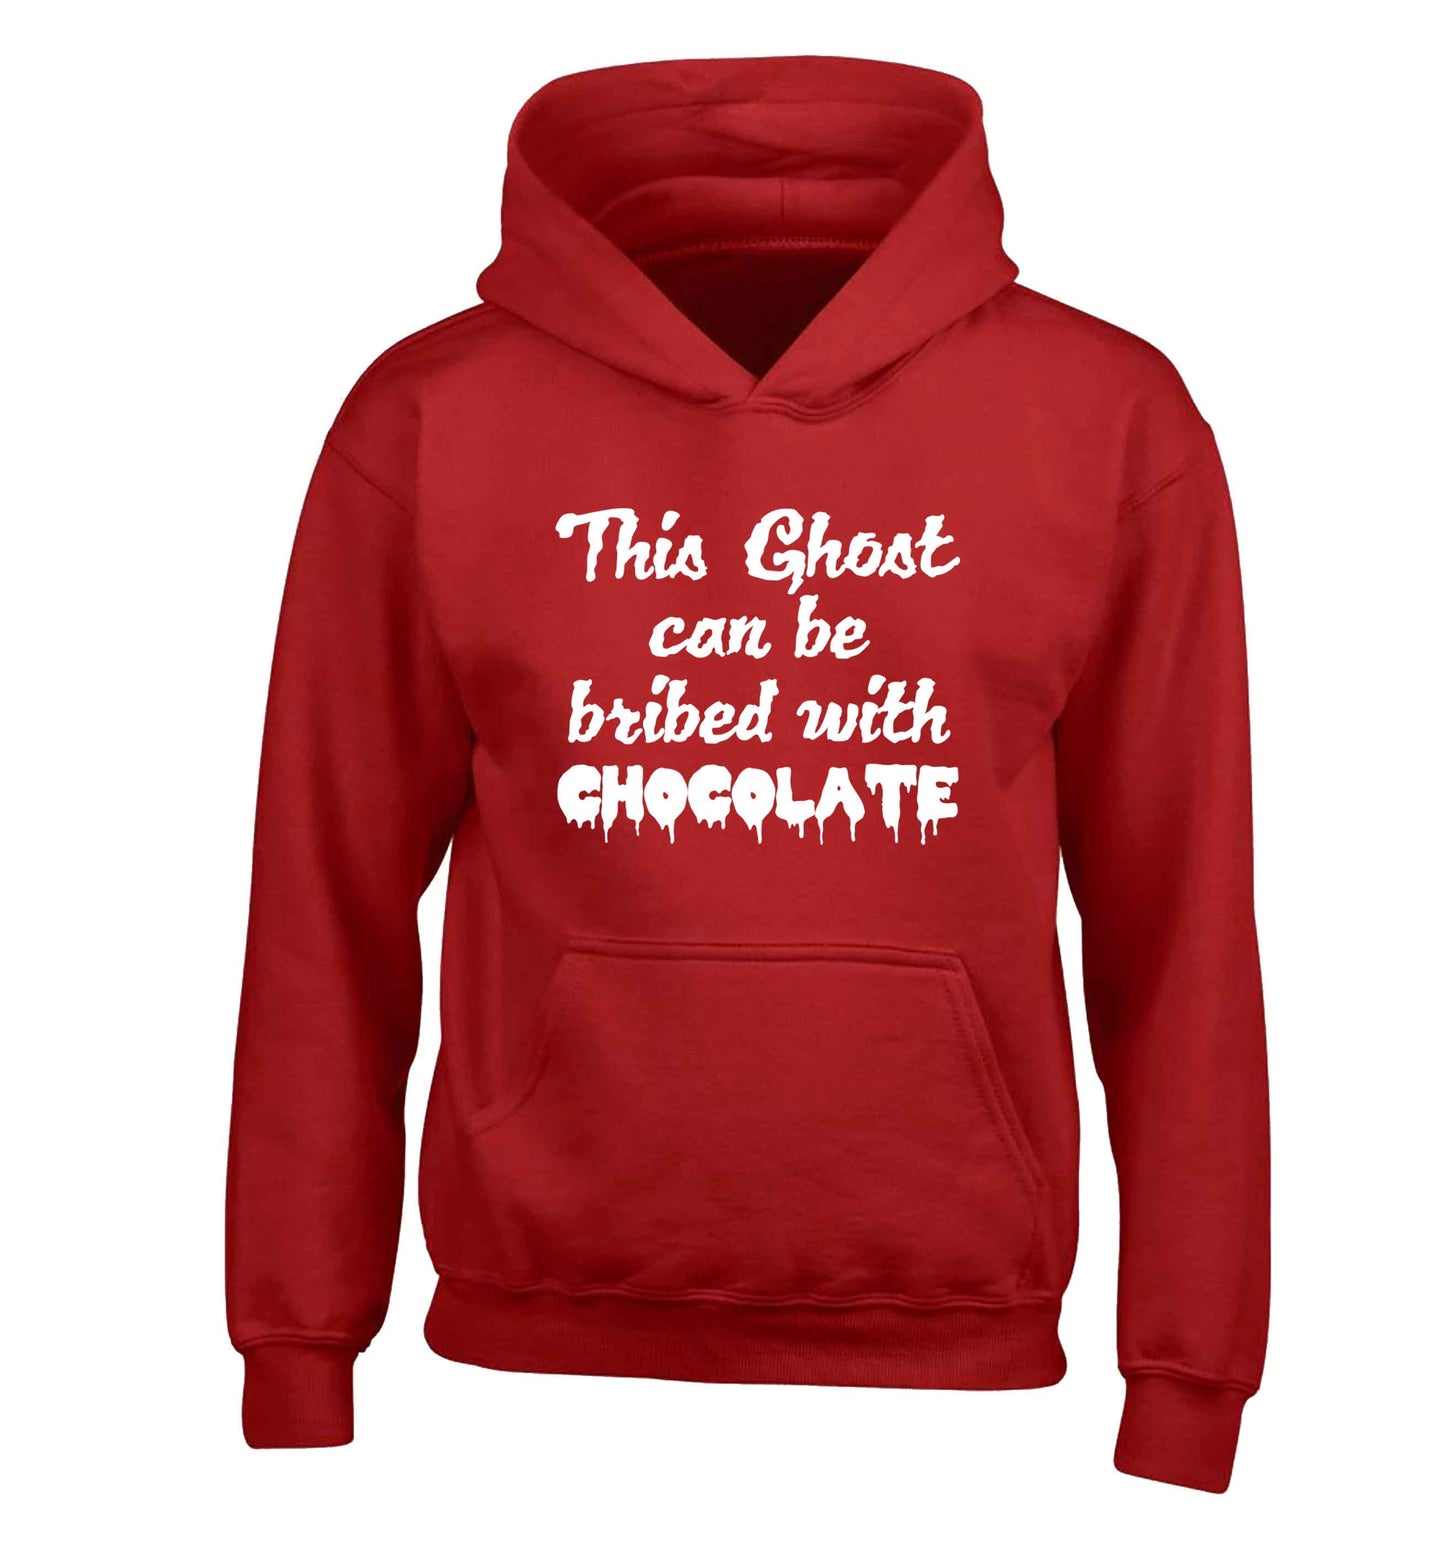 This ghost can be bribed with chocolate children's red hoodie 12-13 Years